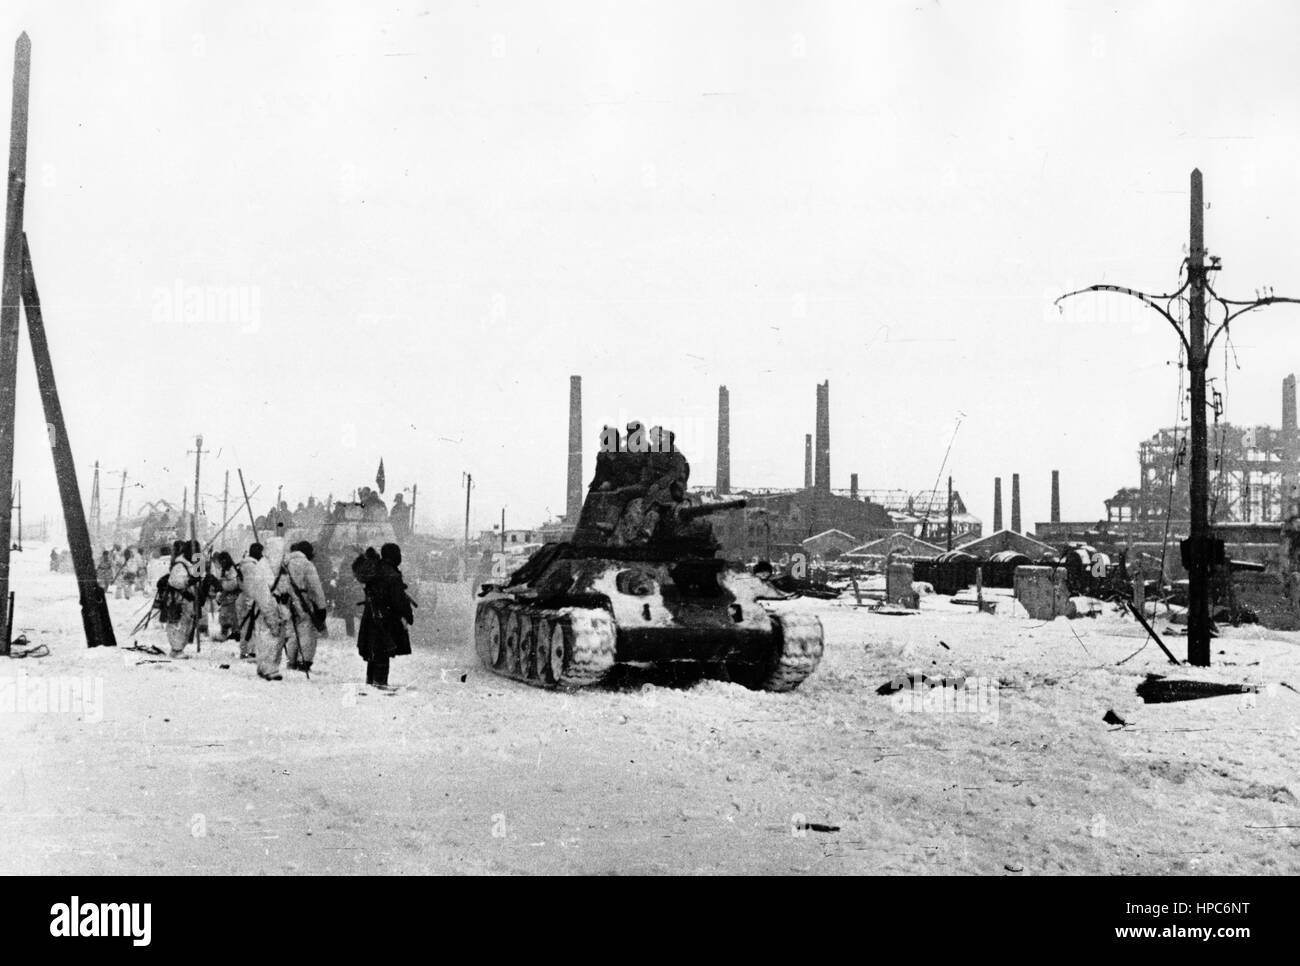 Soviet tank troops of the Don Front meet with the 62nd Army in Stalingrad, Soviet Union, 26 January 1943. Fotoarchiv für Zeitgeschichte | usage worldwide Stock Photo